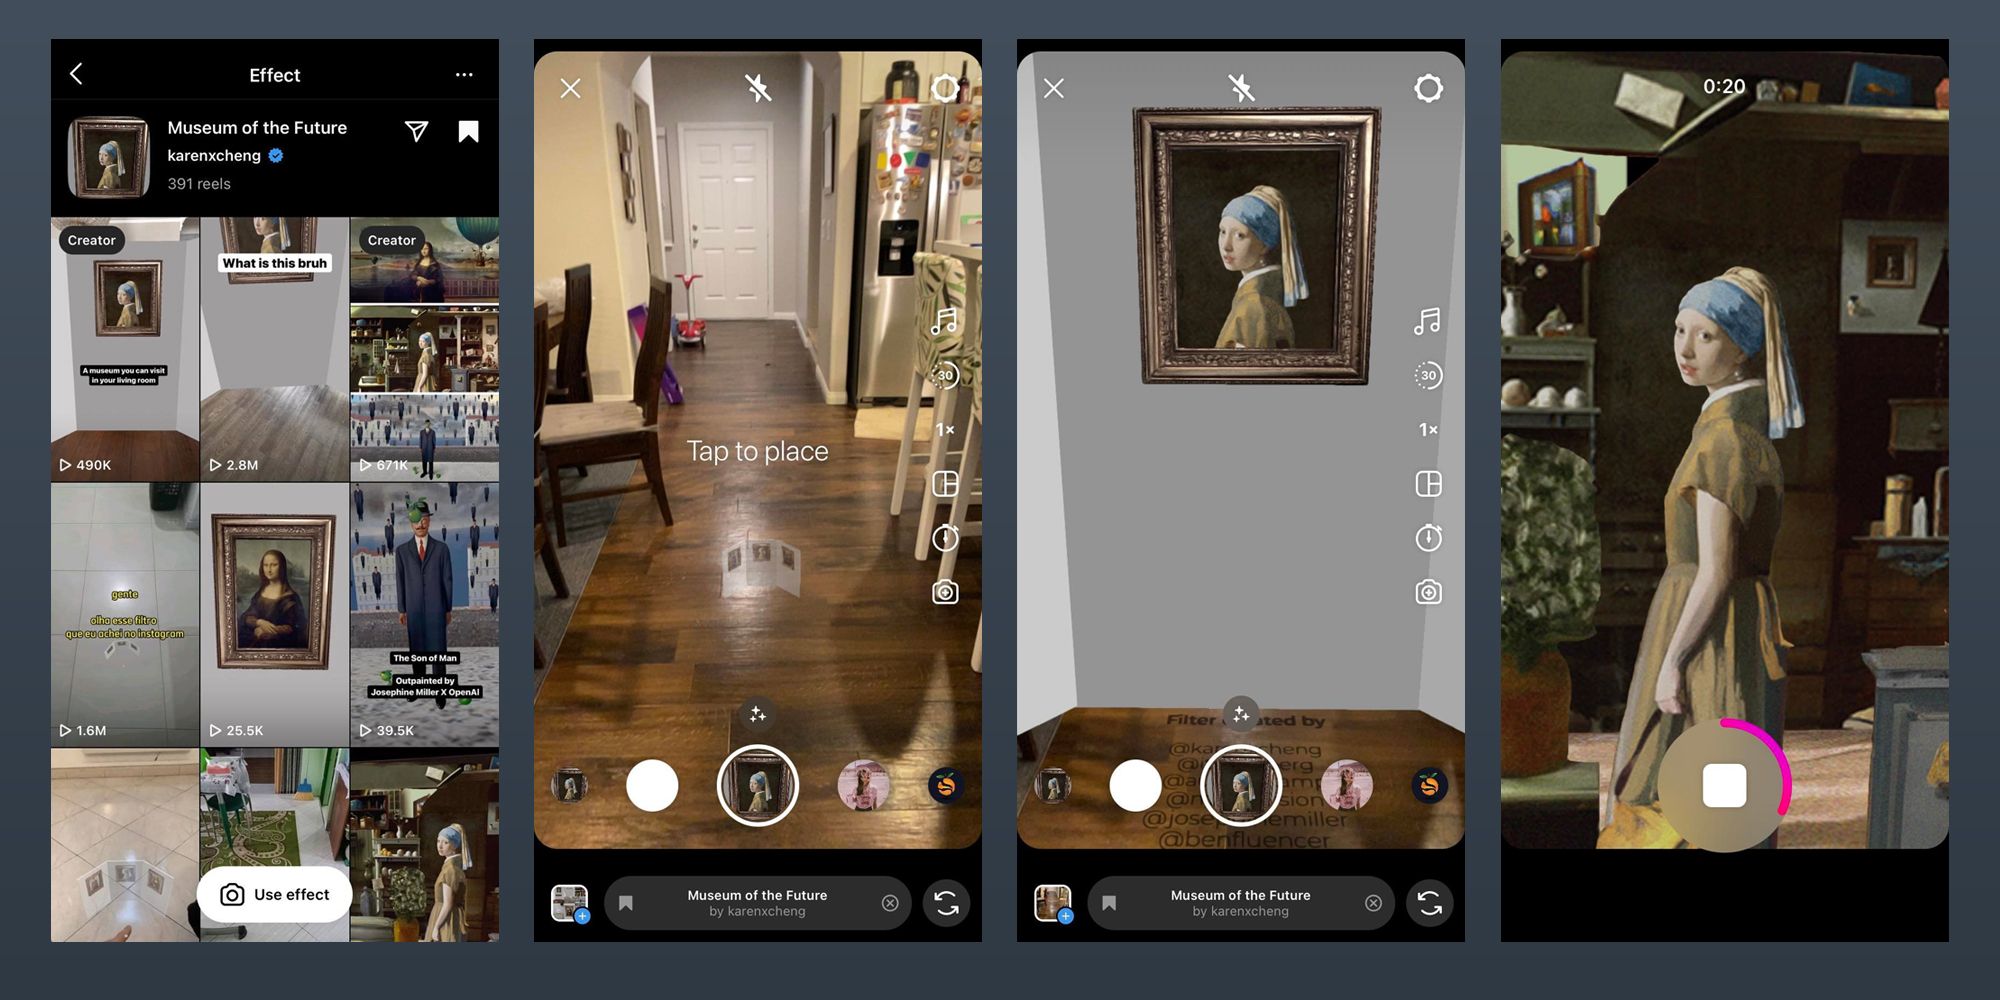 Instagram Museum of the Future Filter Effect pages